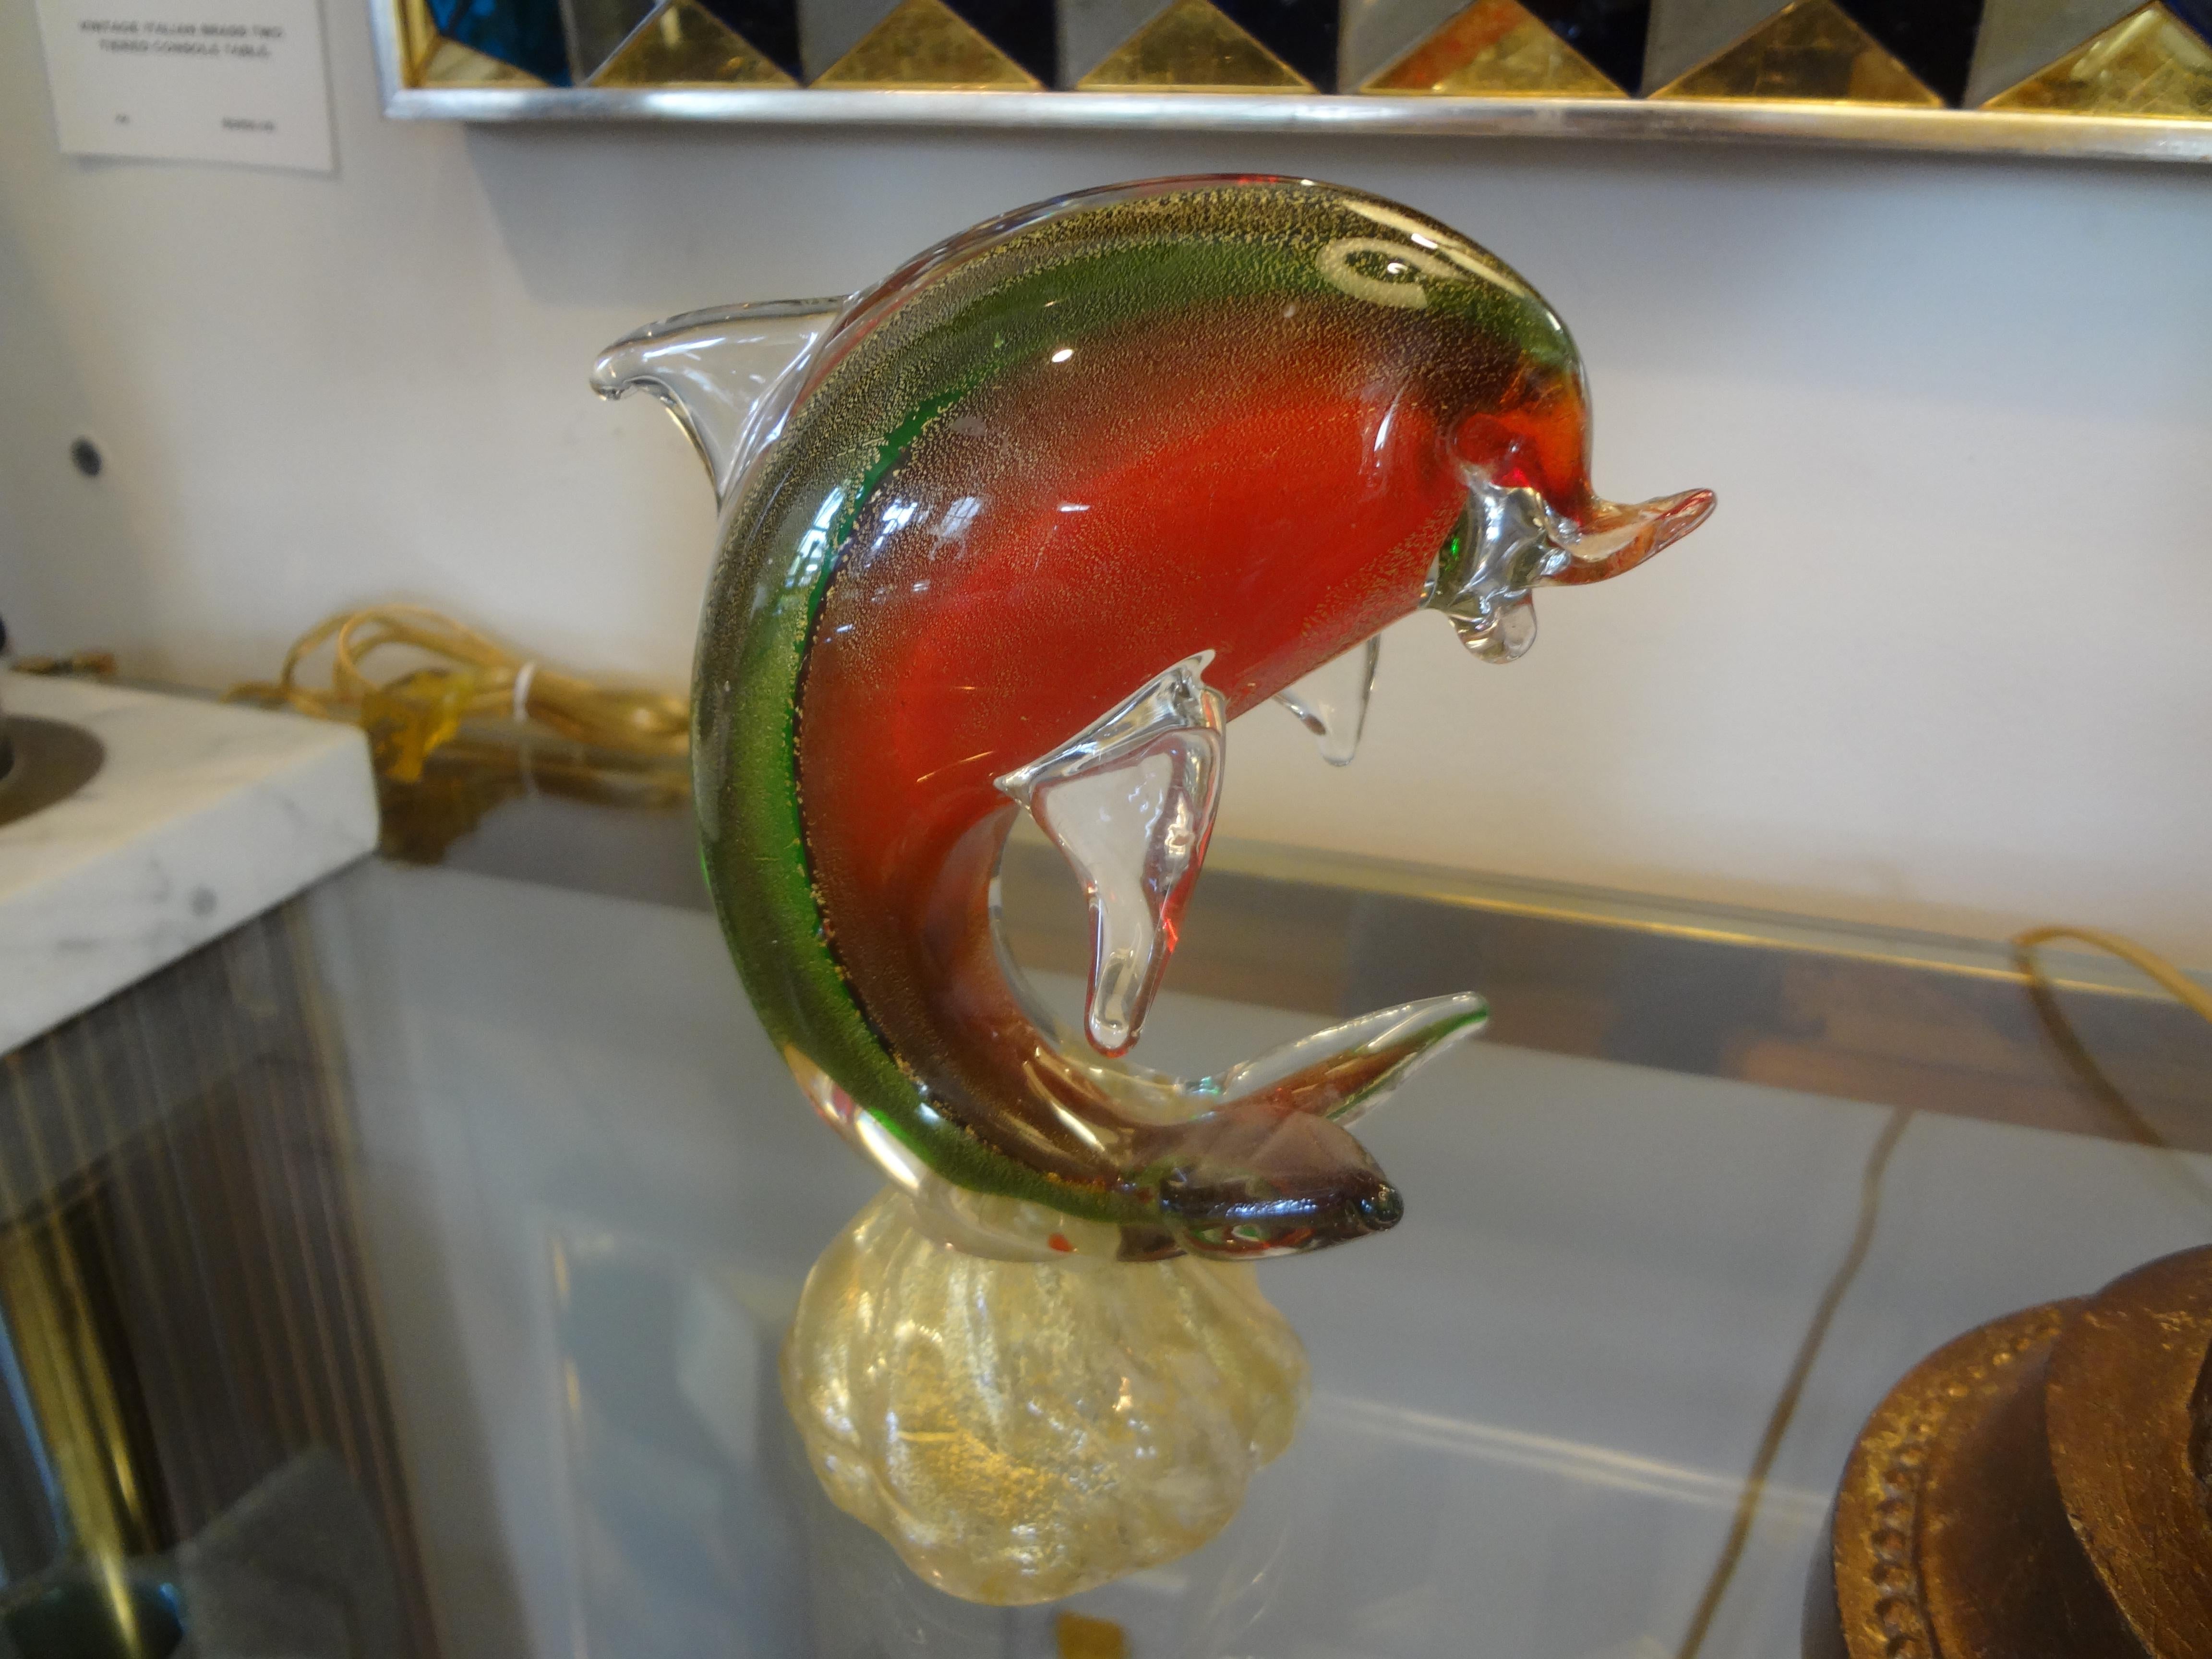 Murano glass dolphin attributed to Barbini. This beautiful colorful dolphin figure or sculpture is hand blown with gold inclusions. Stunning!